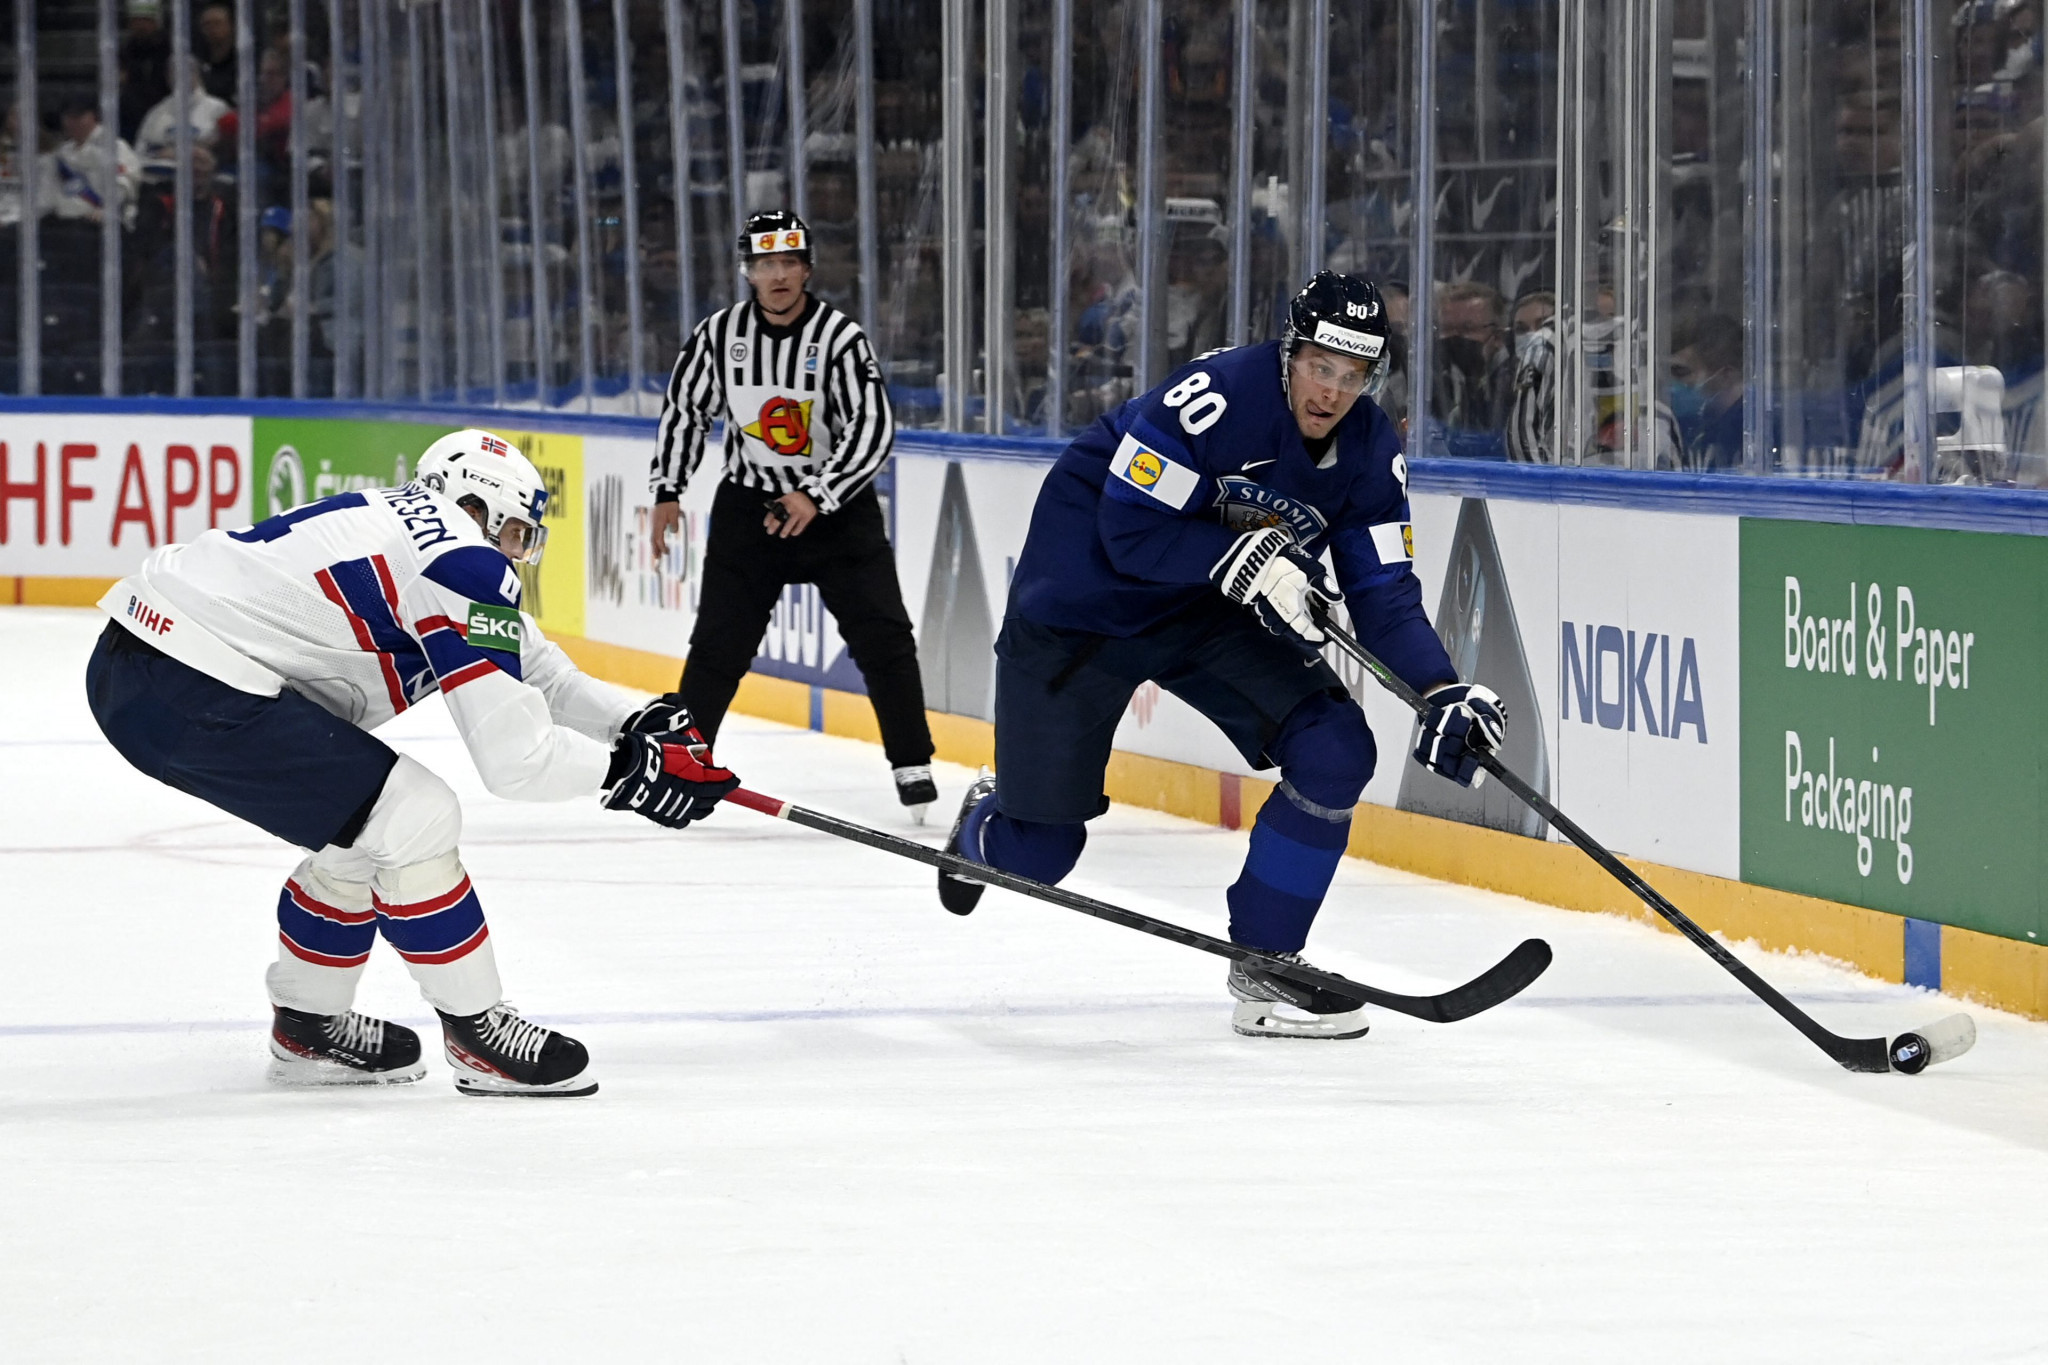 Hosts Finland proved too strong for Norway in Tampere ©Getty Images